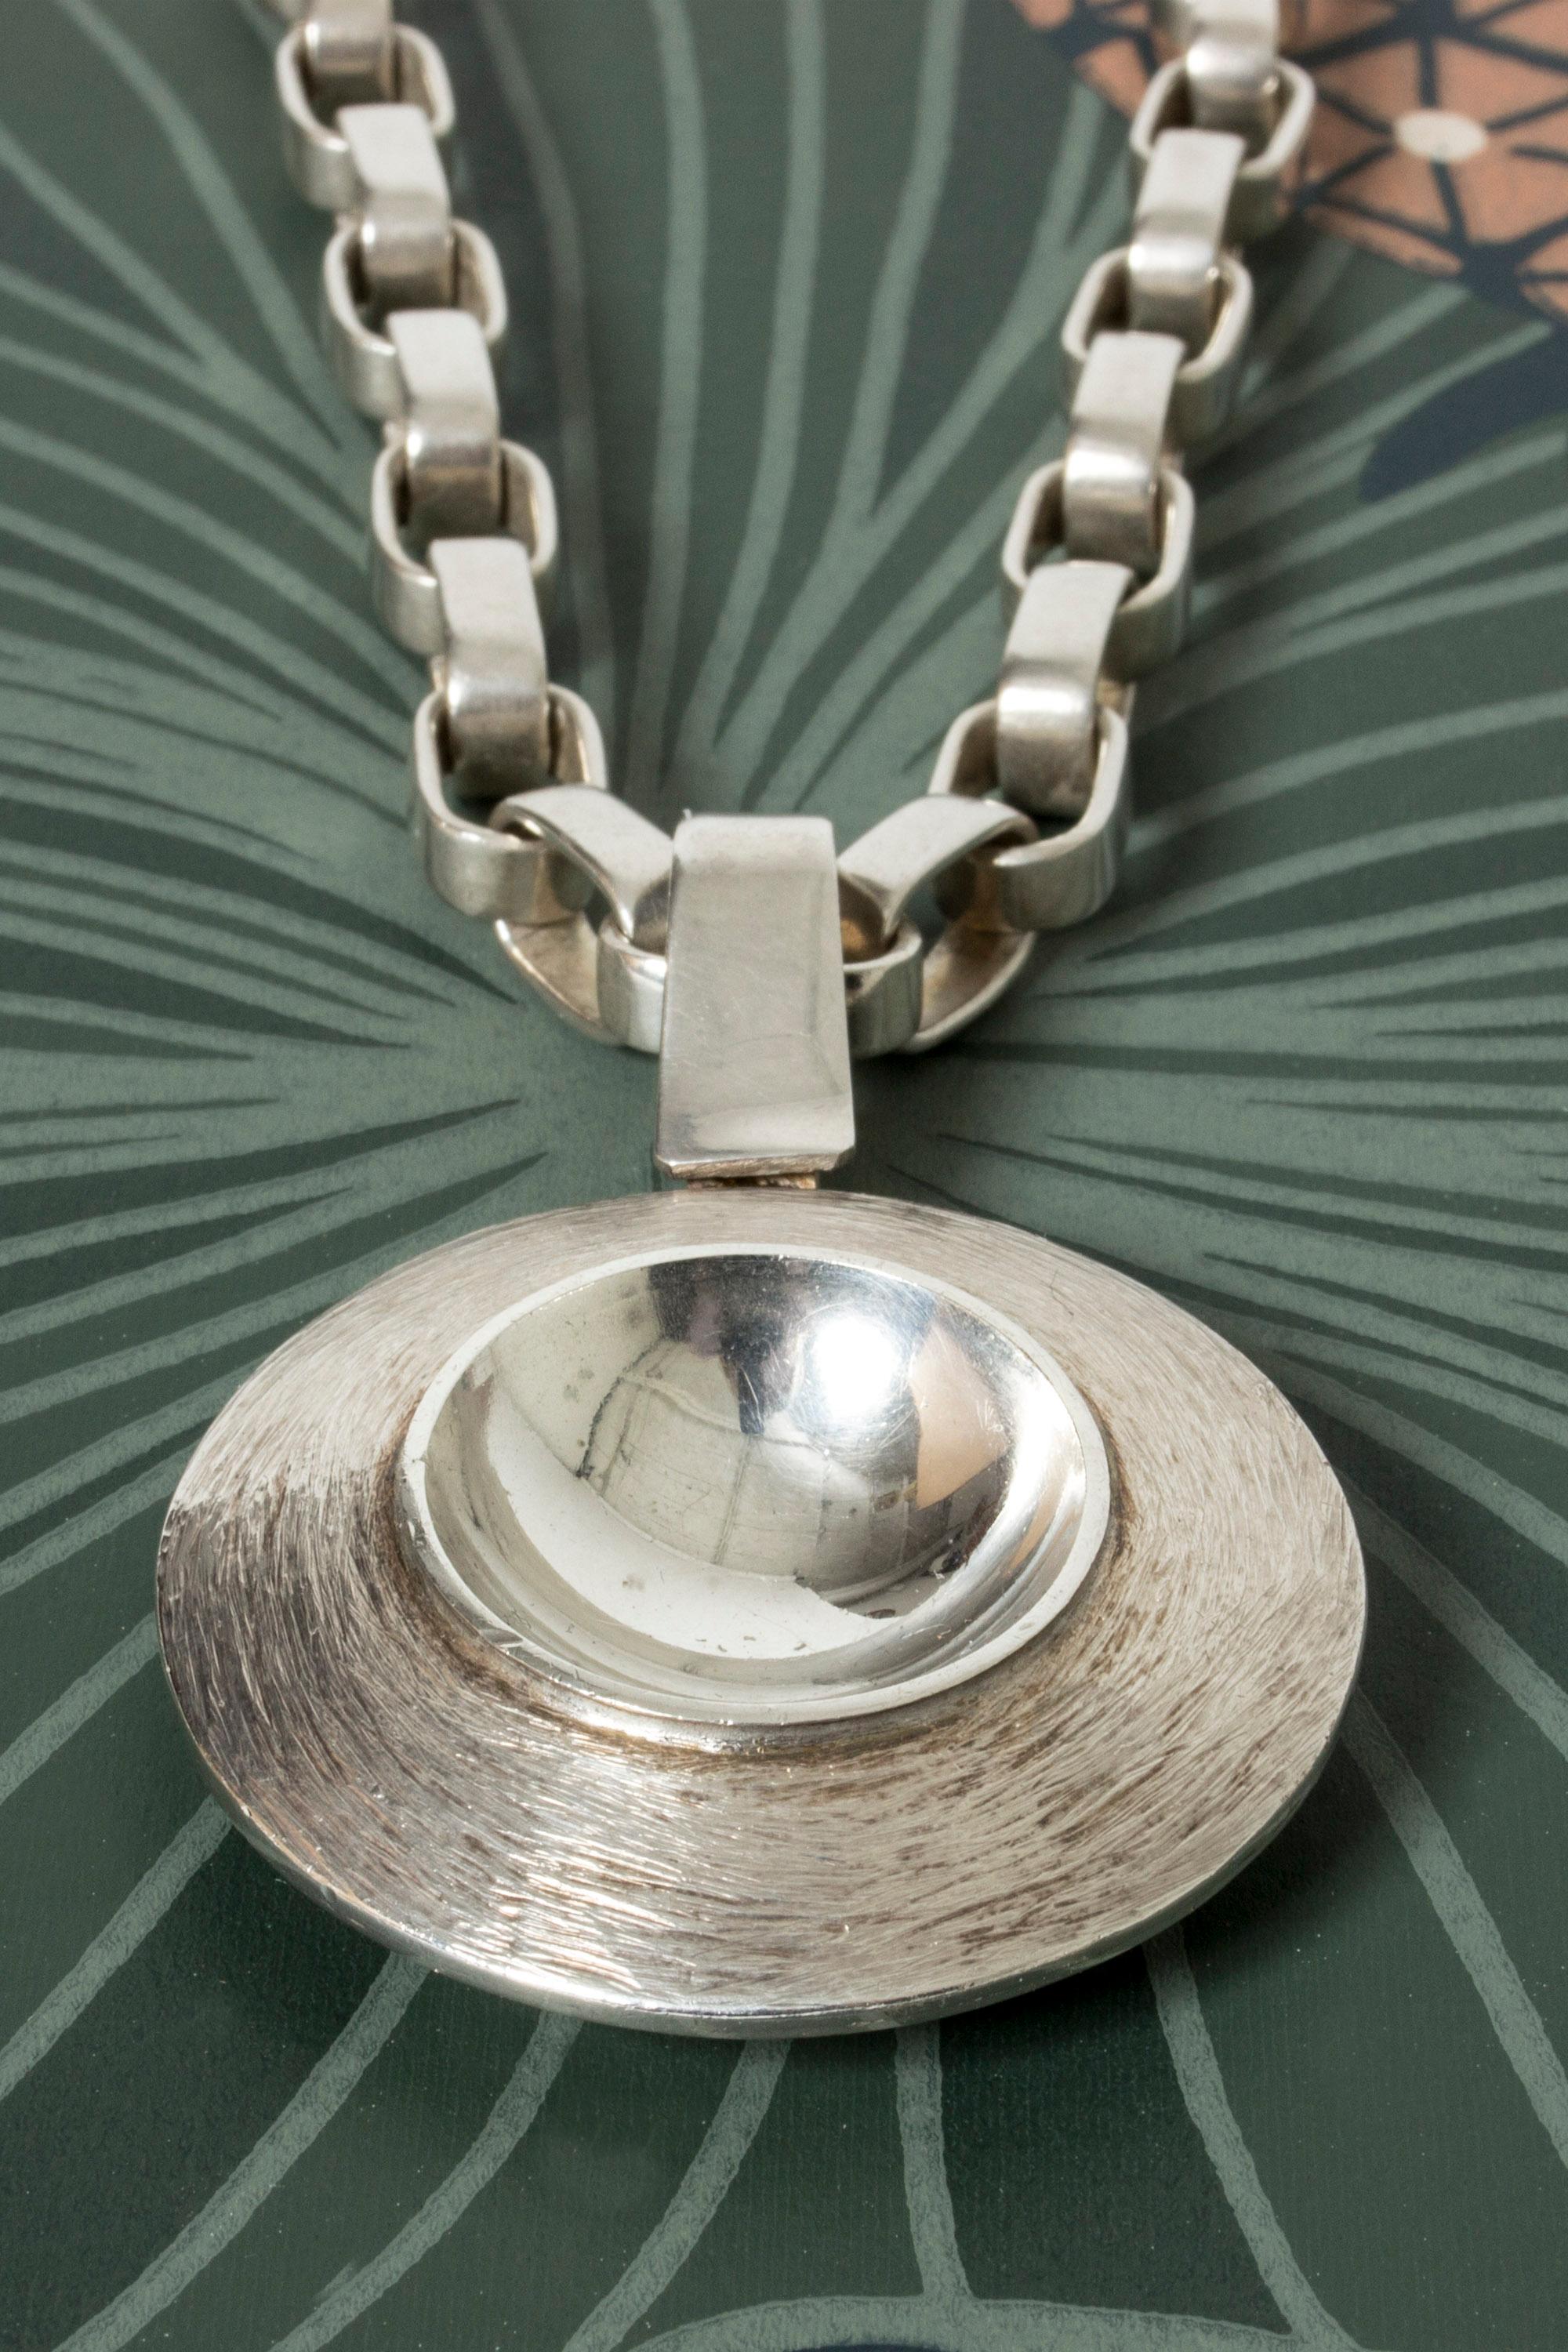 Magnificent silver necklace by Sven-Erik Högberg with a hypnotizing, round pendant on a thick chain that can be worn just as well on its own. Wonderful design and craftsmanship.

Year: 1974 (pendant) and 1978 (chain)
Dimensions: Height 6.5 cm